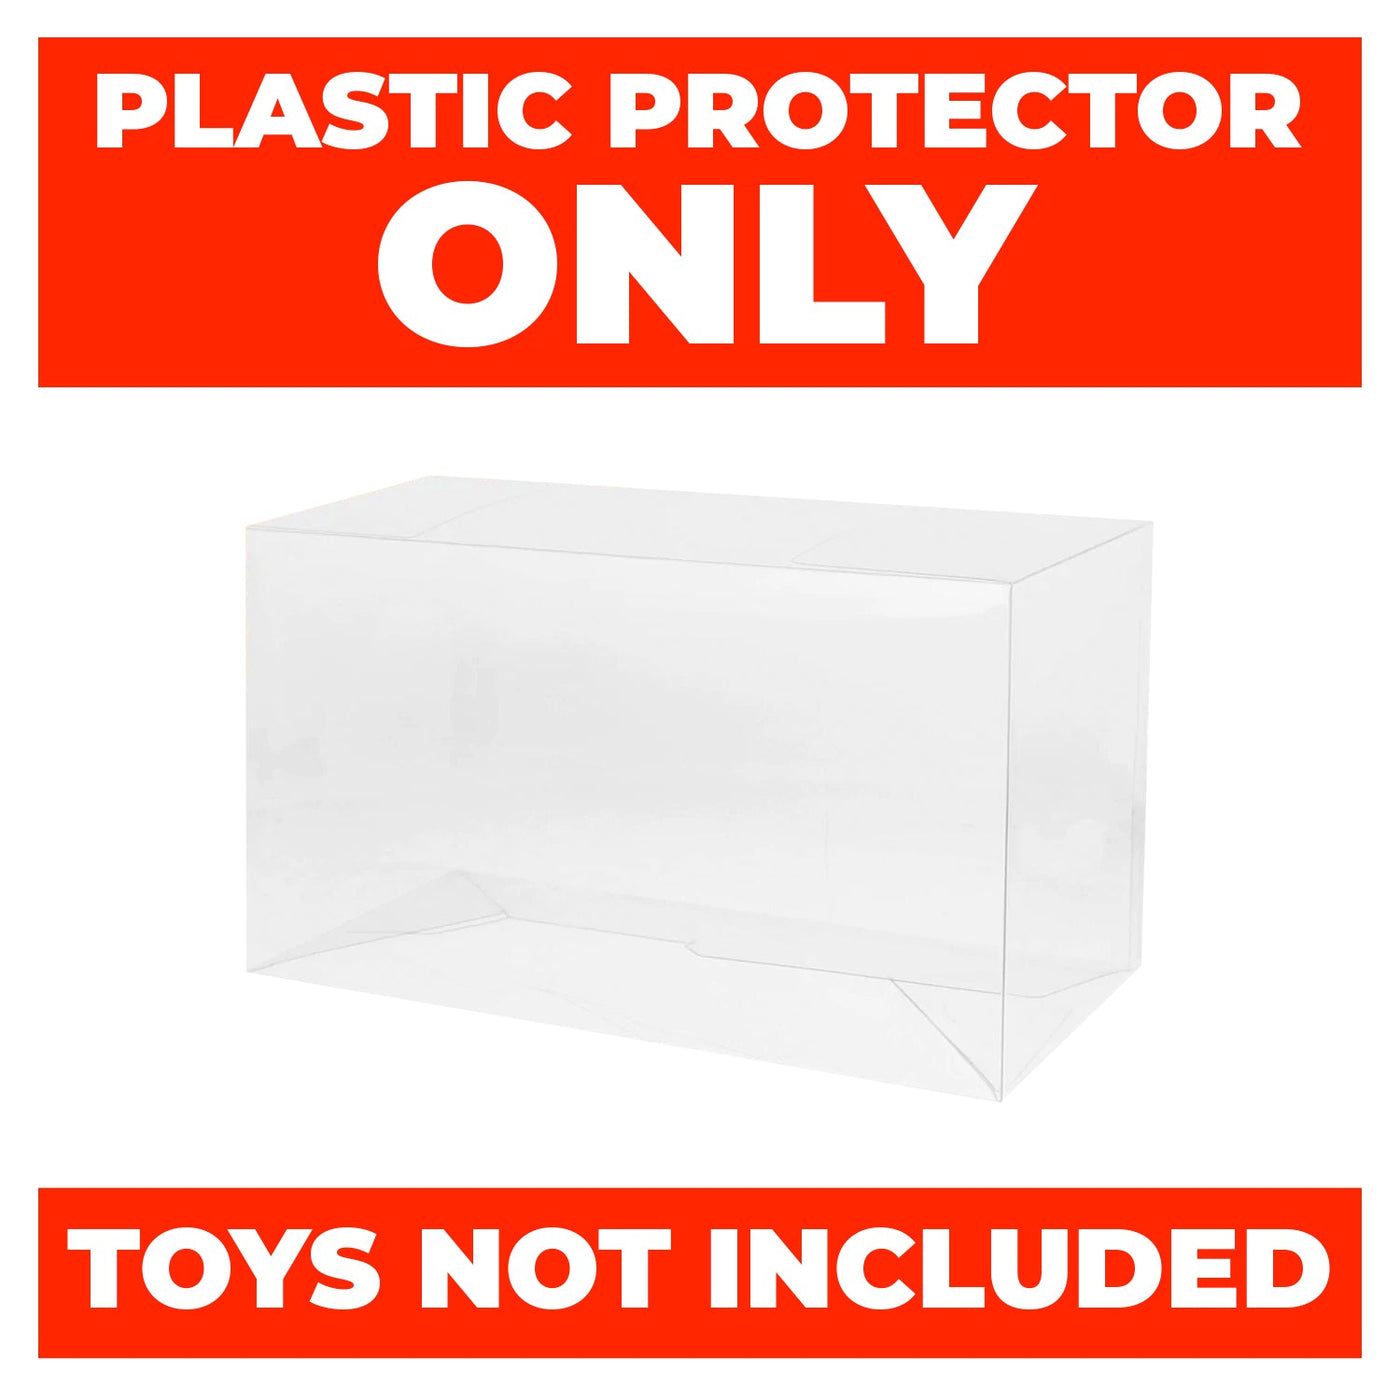 6 inch best funko pop protectors thick strong uv scratch flat top stack vinyl display geek plastic shield vaulted eco armor fits collect protect display case kollector protector